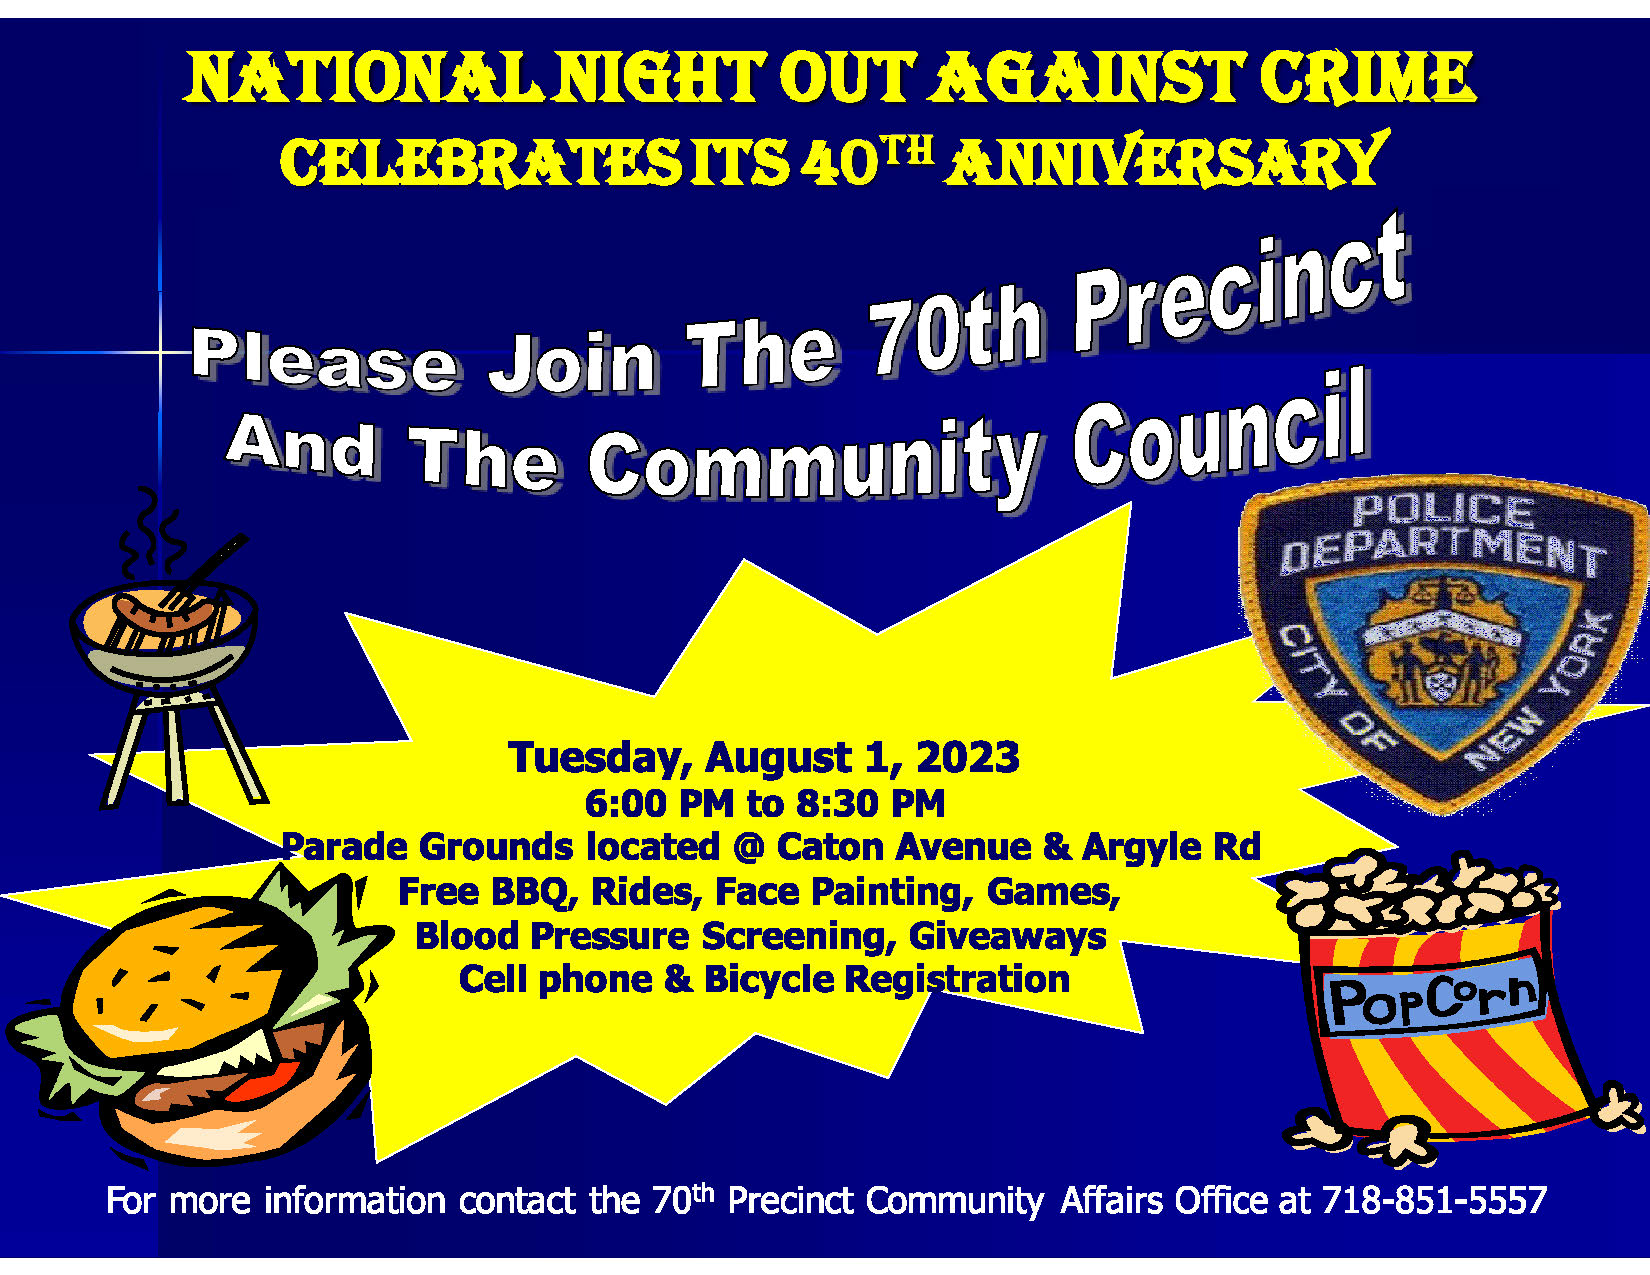 2023-70pct NNO Flyer 8.1.23